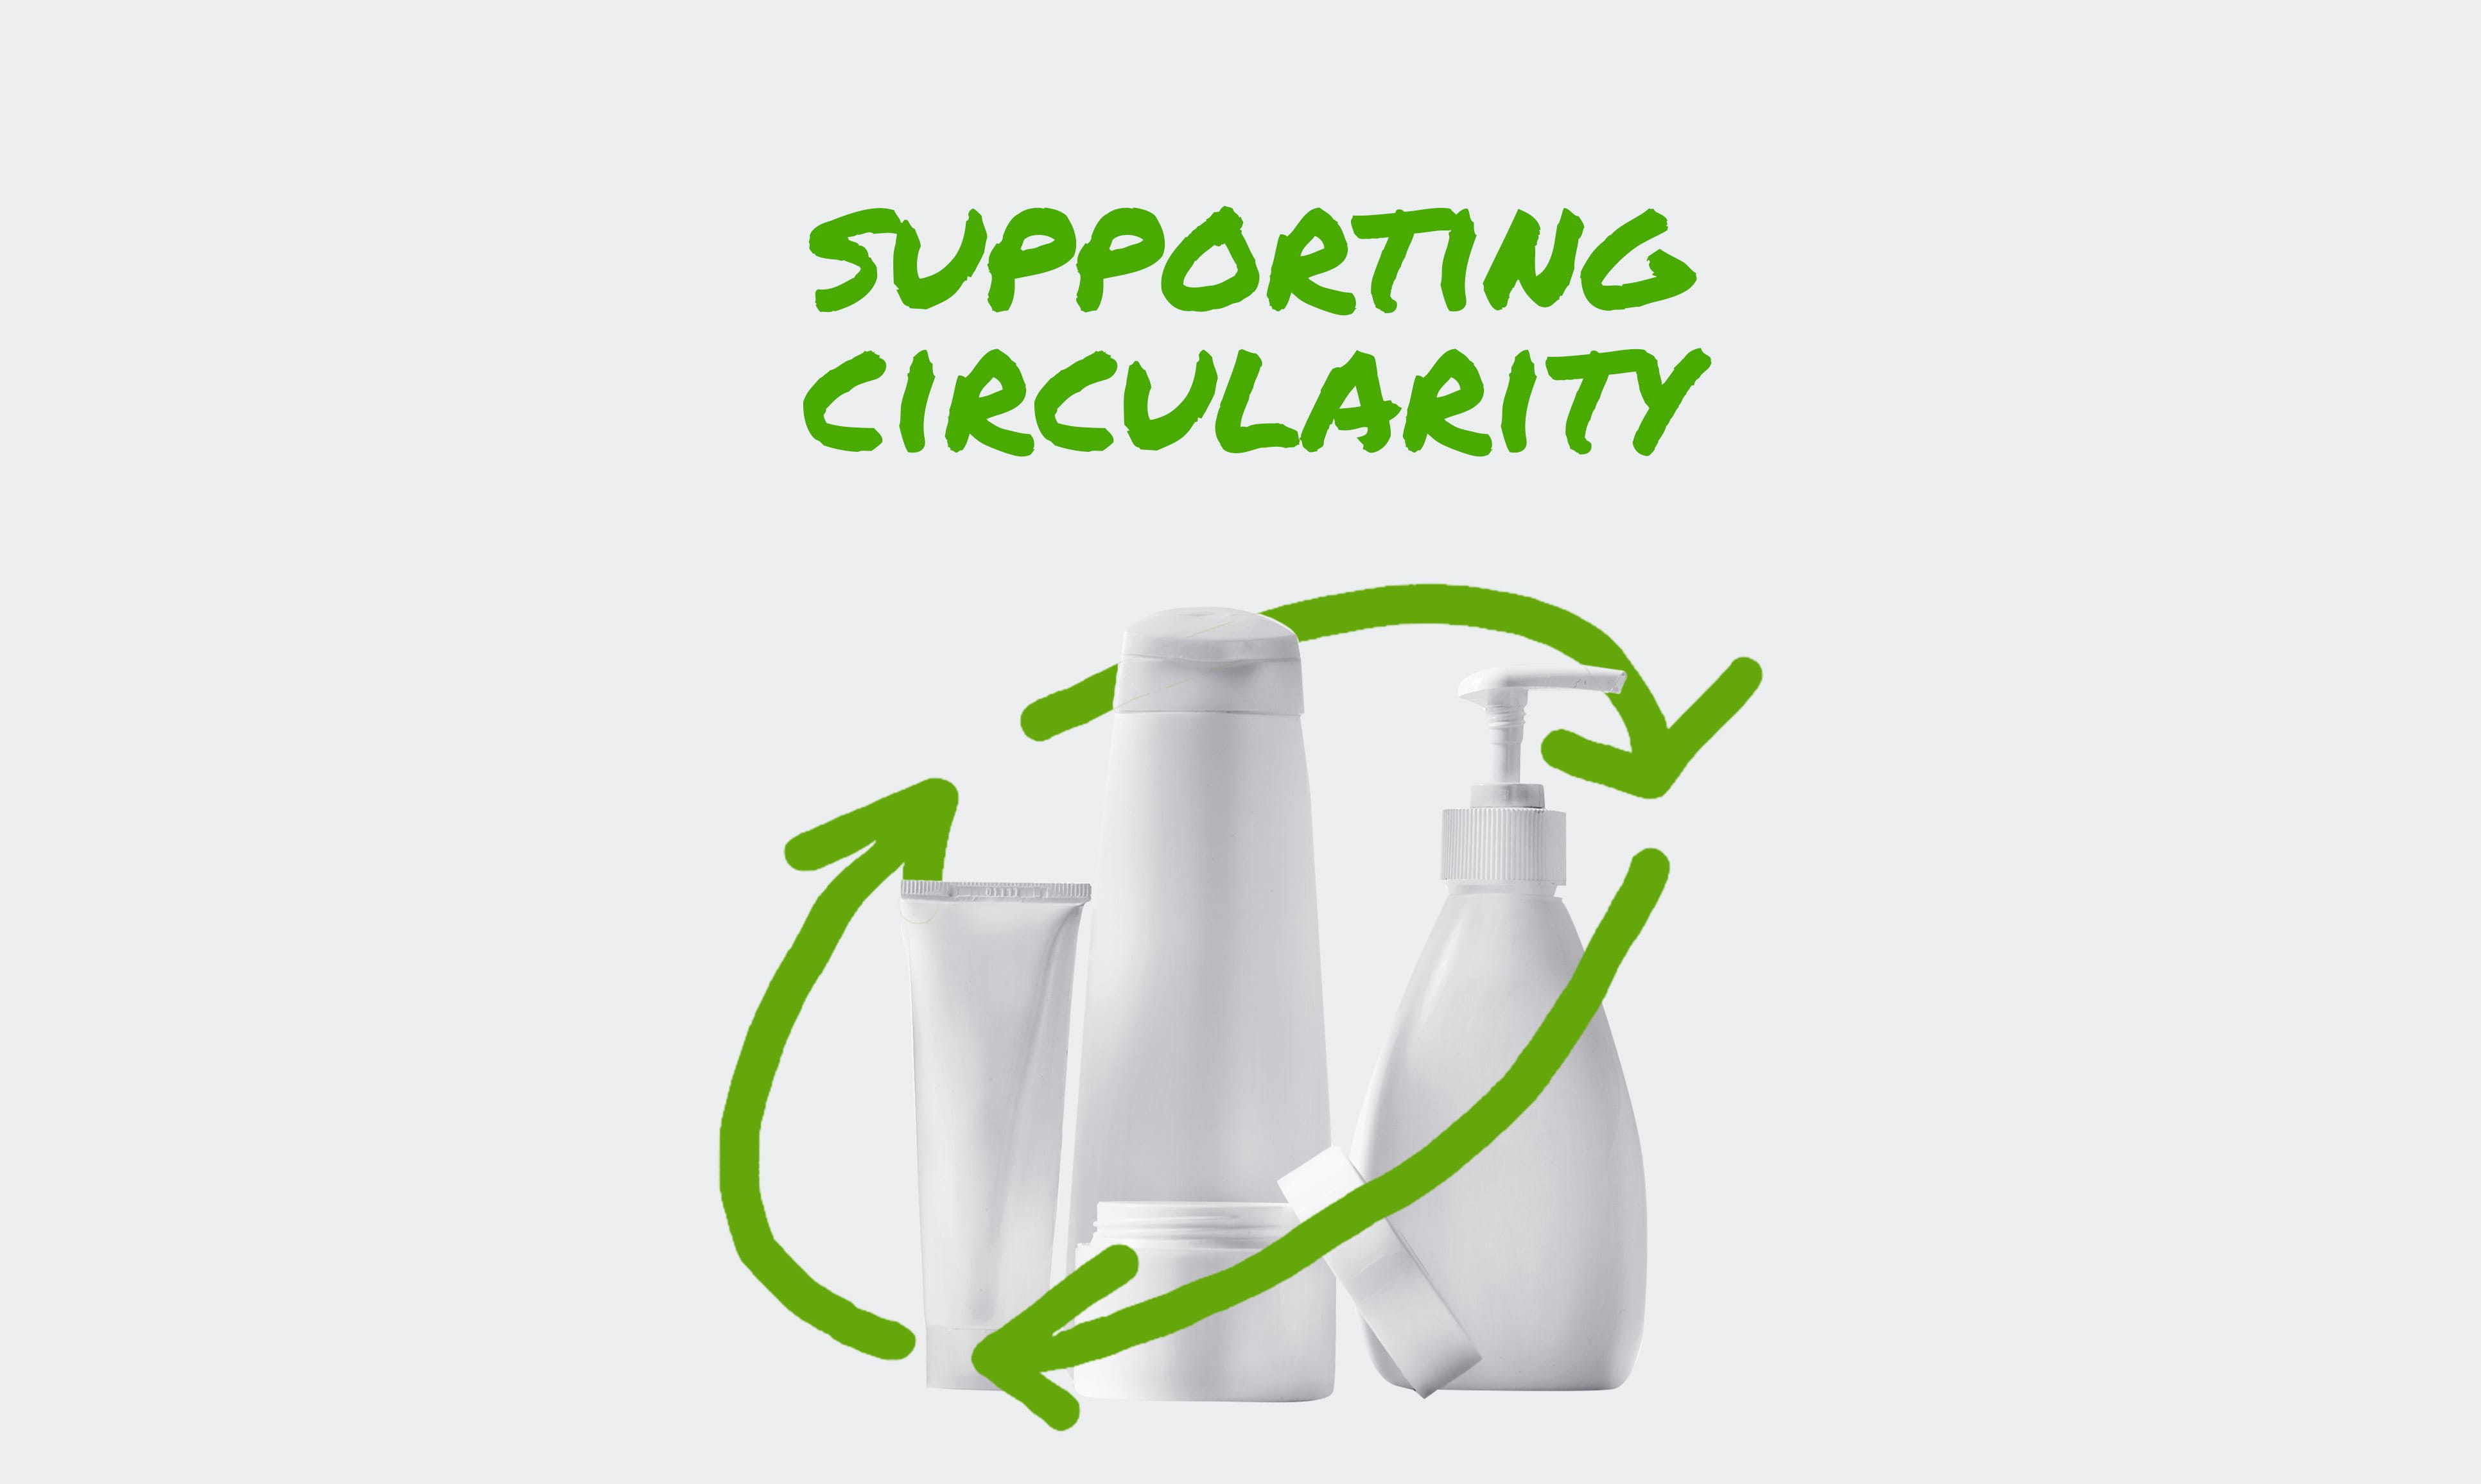 Three lotion bottles encircled by a stylized recycling symbol